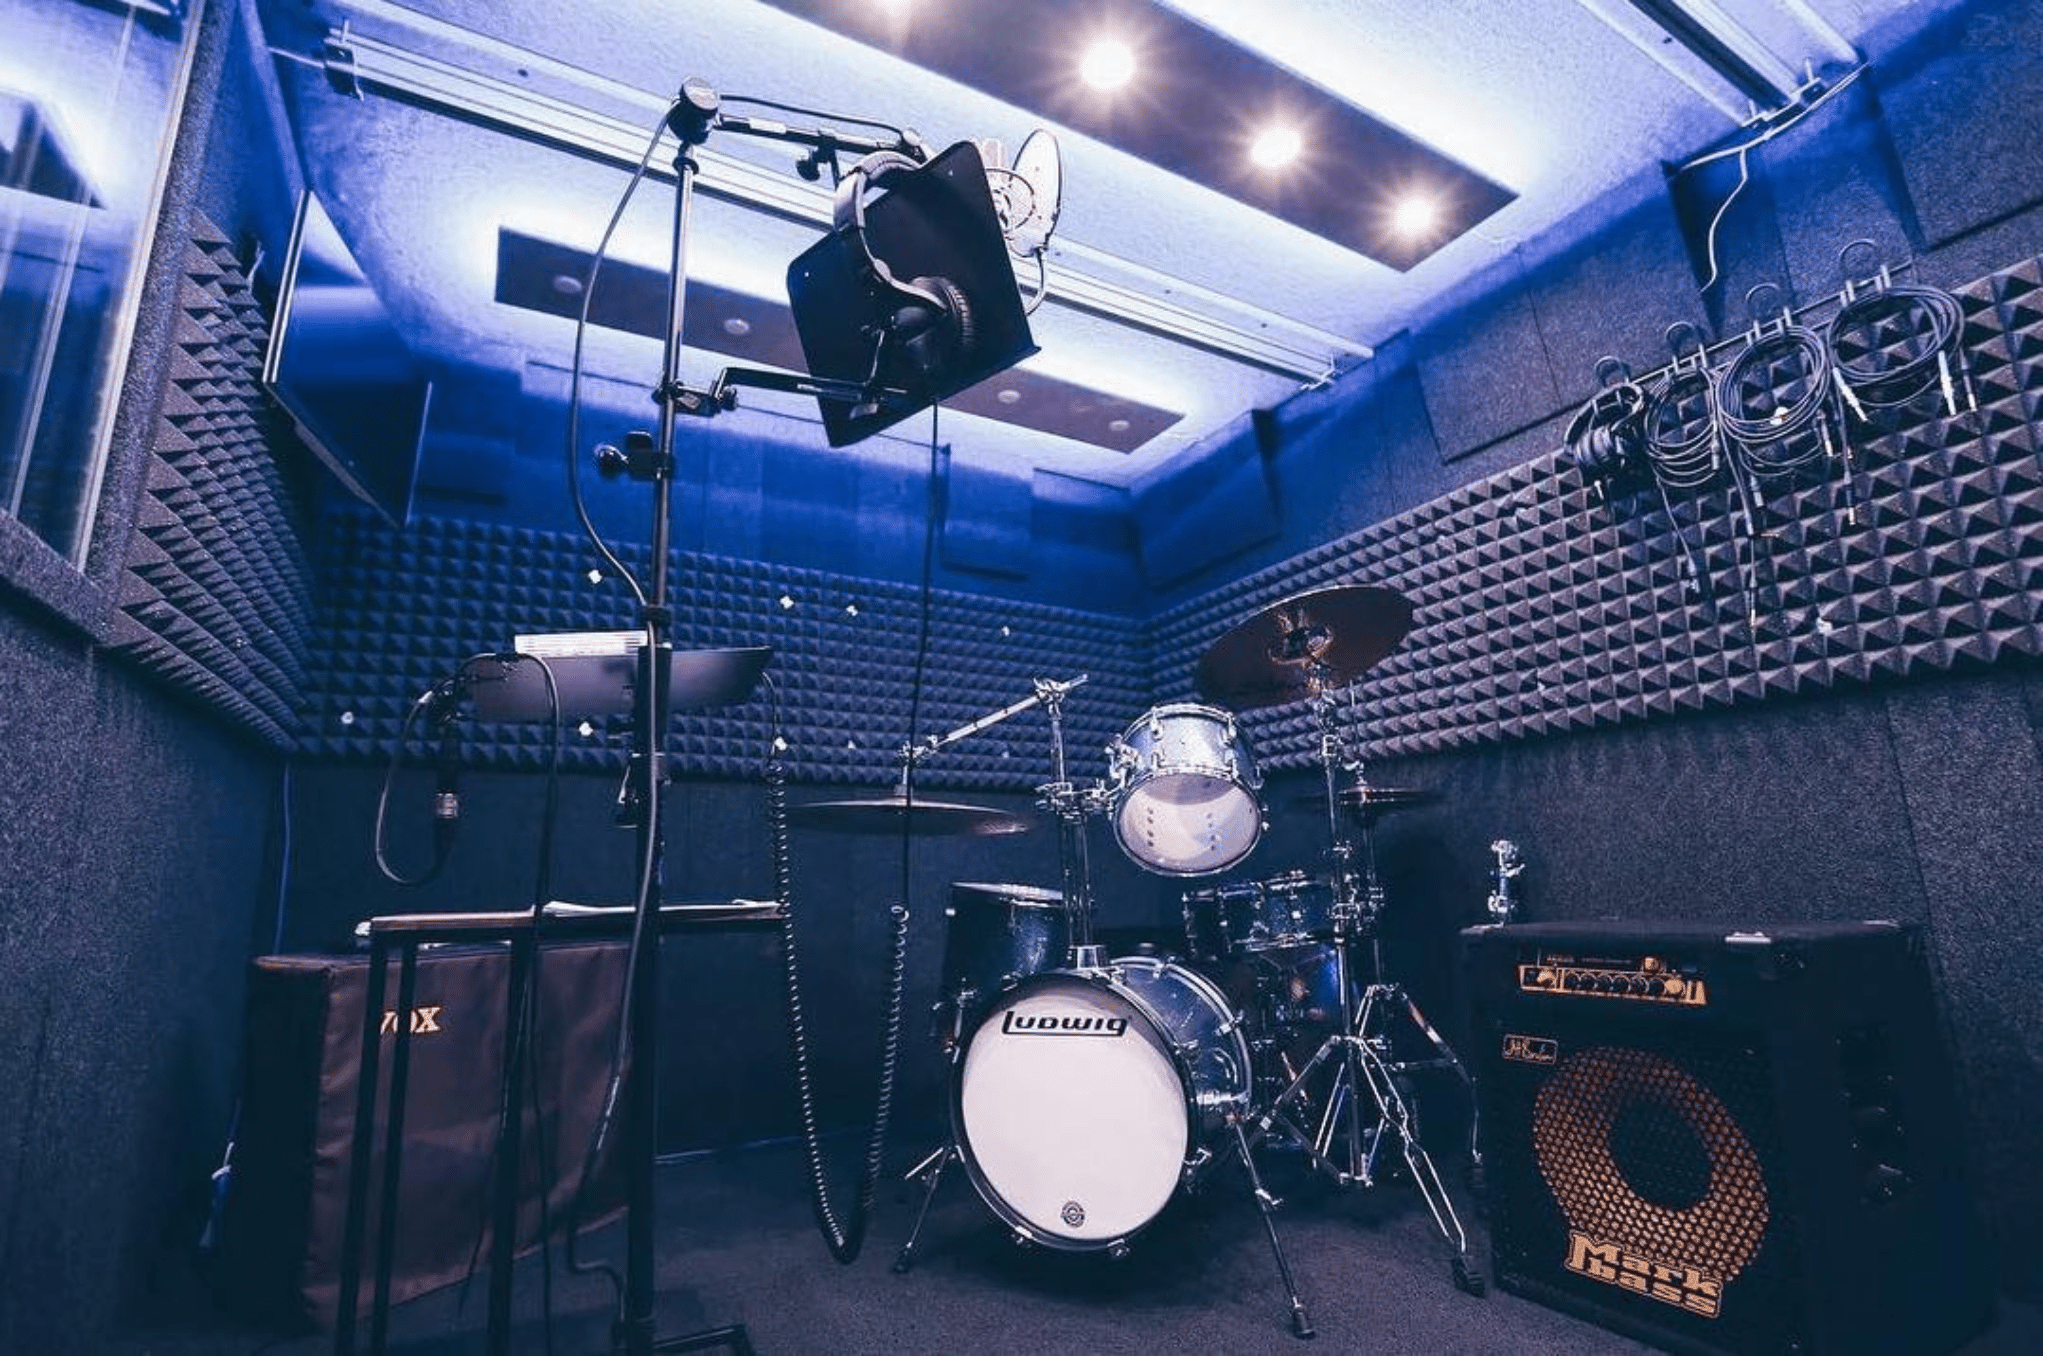 Interior of a WhisperRoom Practice Room showcasing a full drum kit, bass amp, guitar amp, monitor, microphones, and other musical gear for practice.